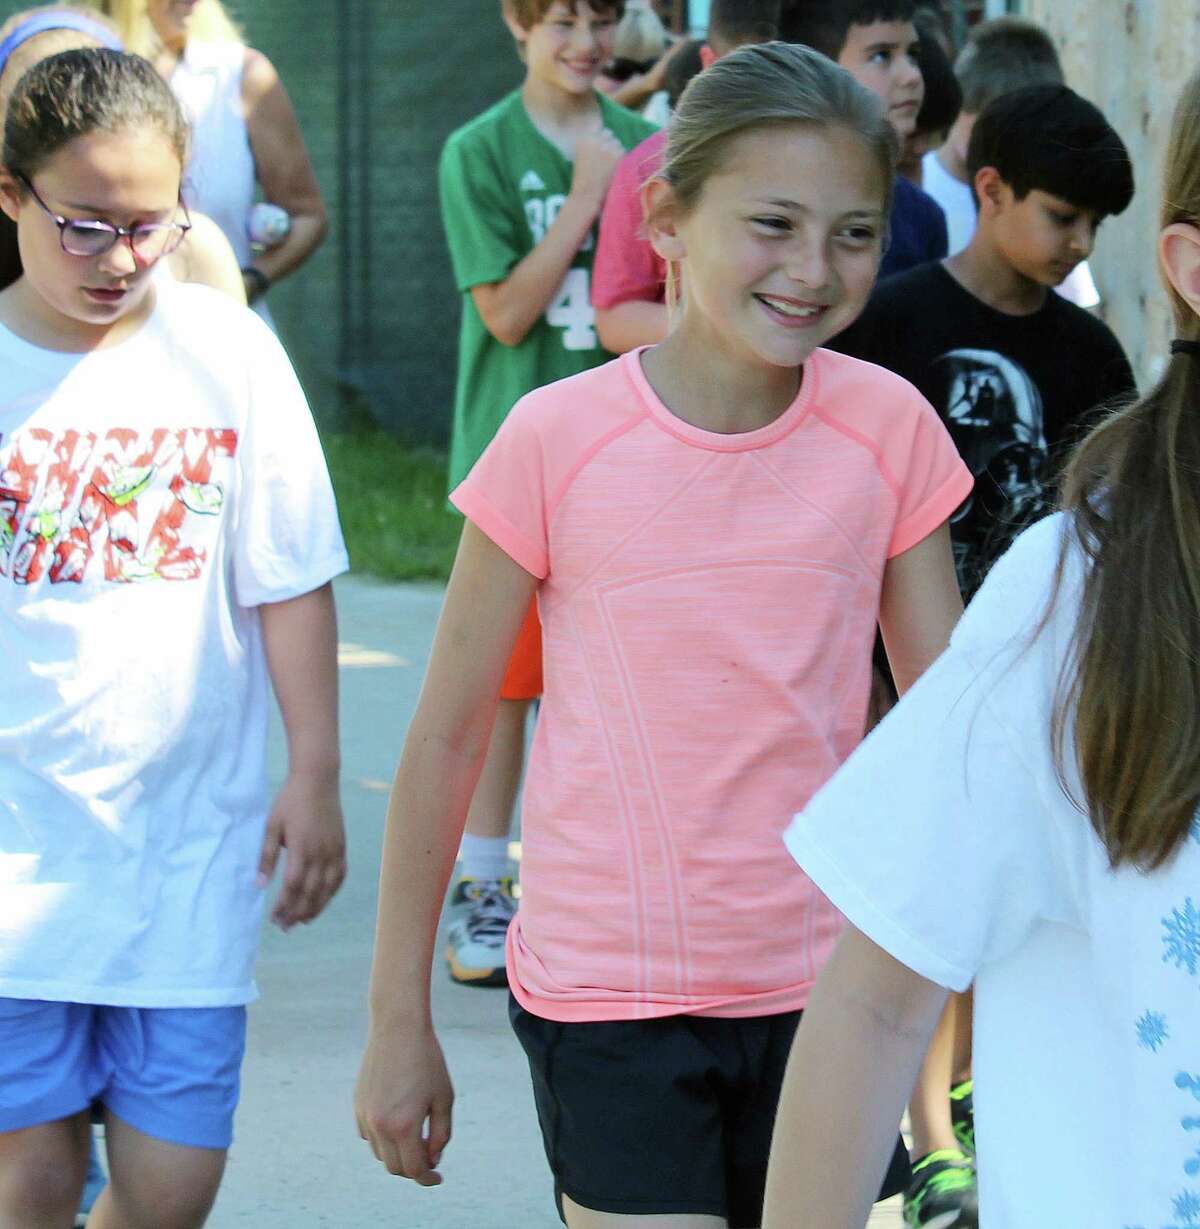 South School fourth grader Delaney Bennhoff walked over to Saxe Middle School in New Canaan, CT as part of her orientation on June 12, 2017.